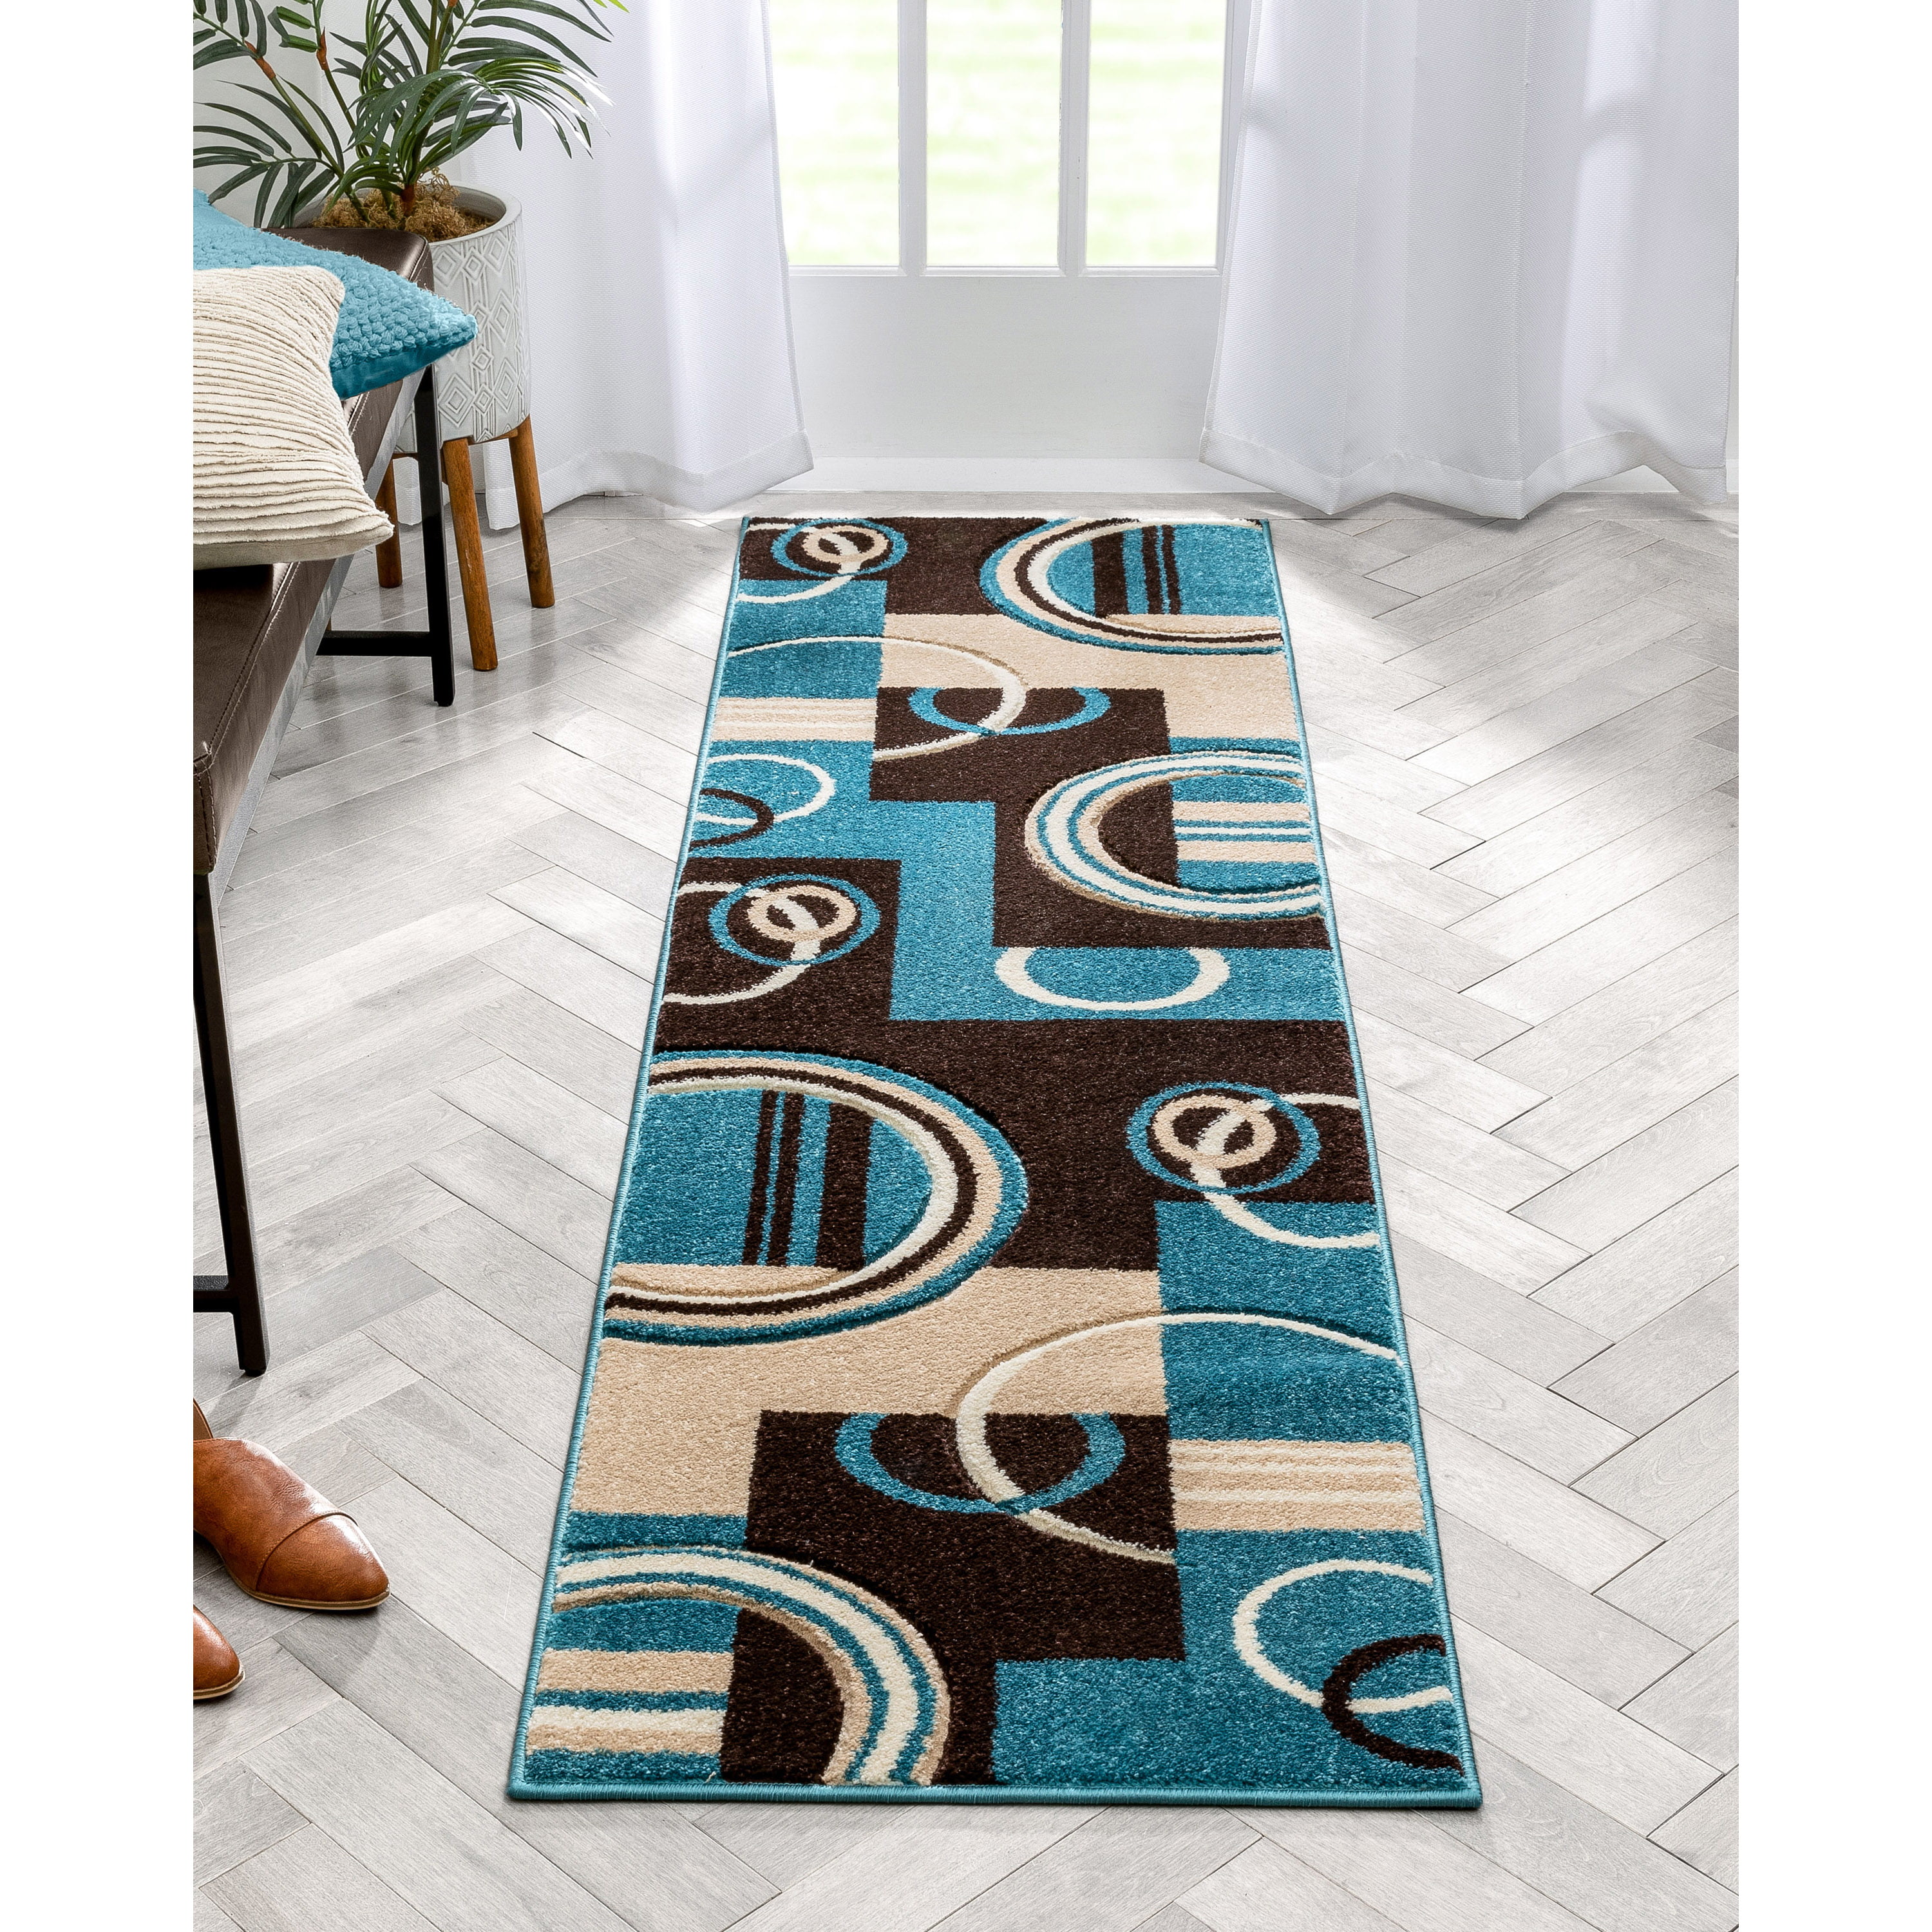 Well Woven Echo Shapes Circles Blue, Best Way To Clean Runner Rugs